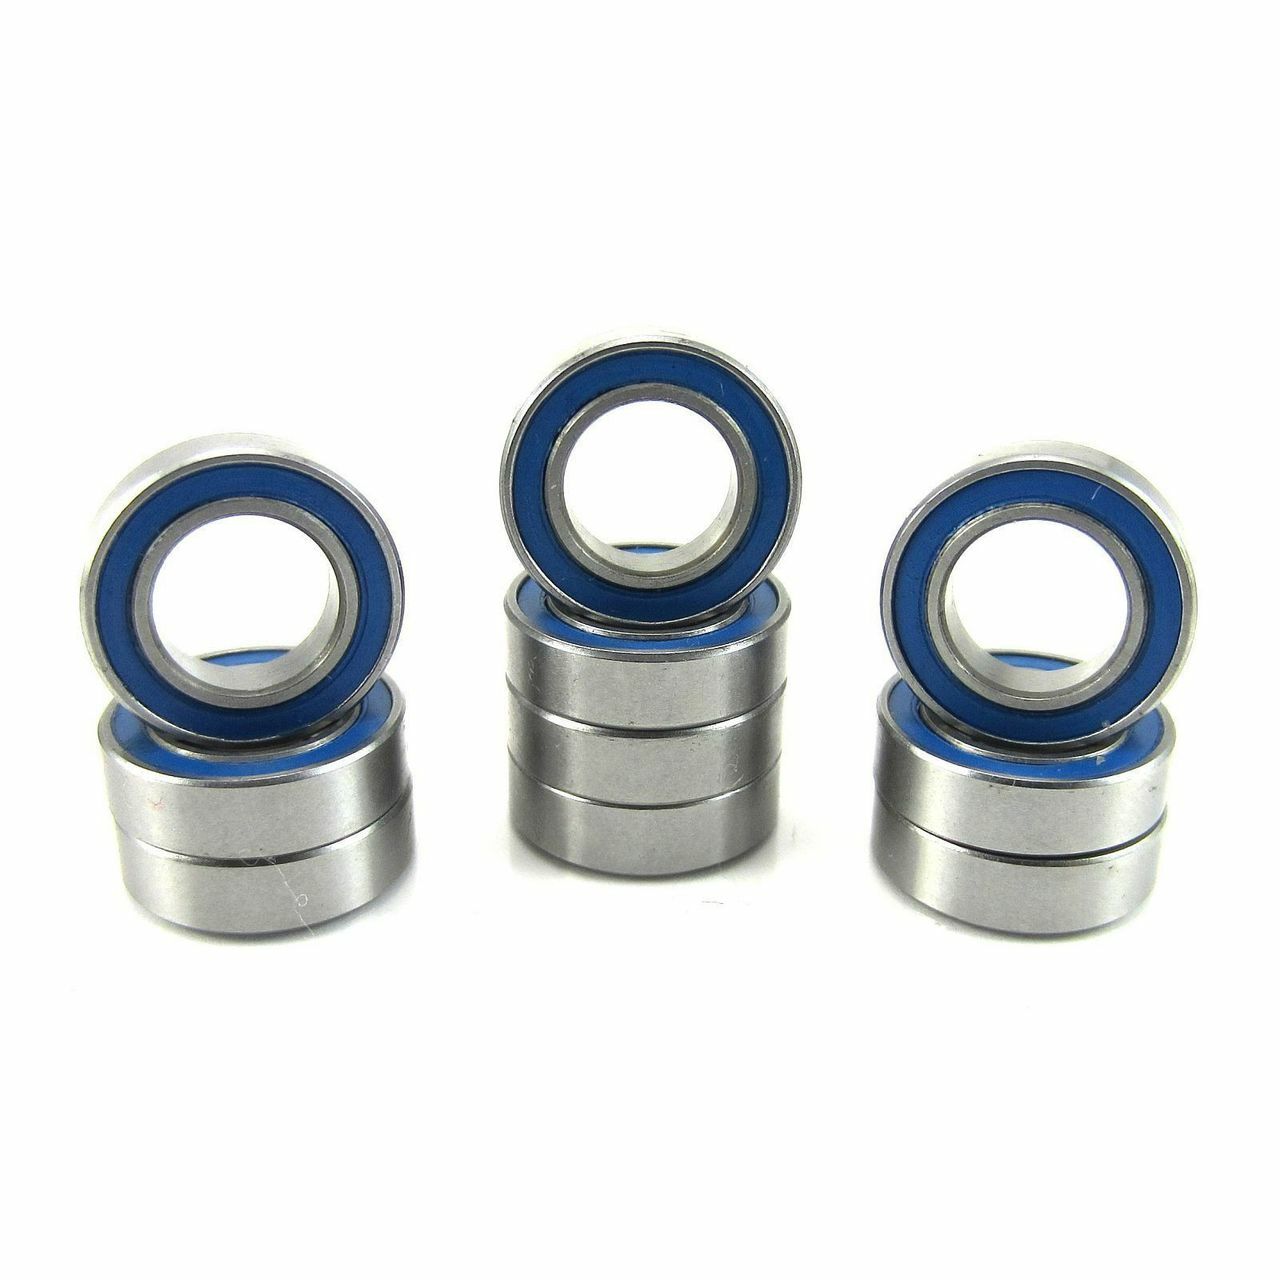 MR148-2RS 8x14x4mm Precision High Speed RC Car Ball Bearing, Chrome Steel (GCr15) with Blue Rubber Seals ABEC-1 ABEC-3 ABEC-5